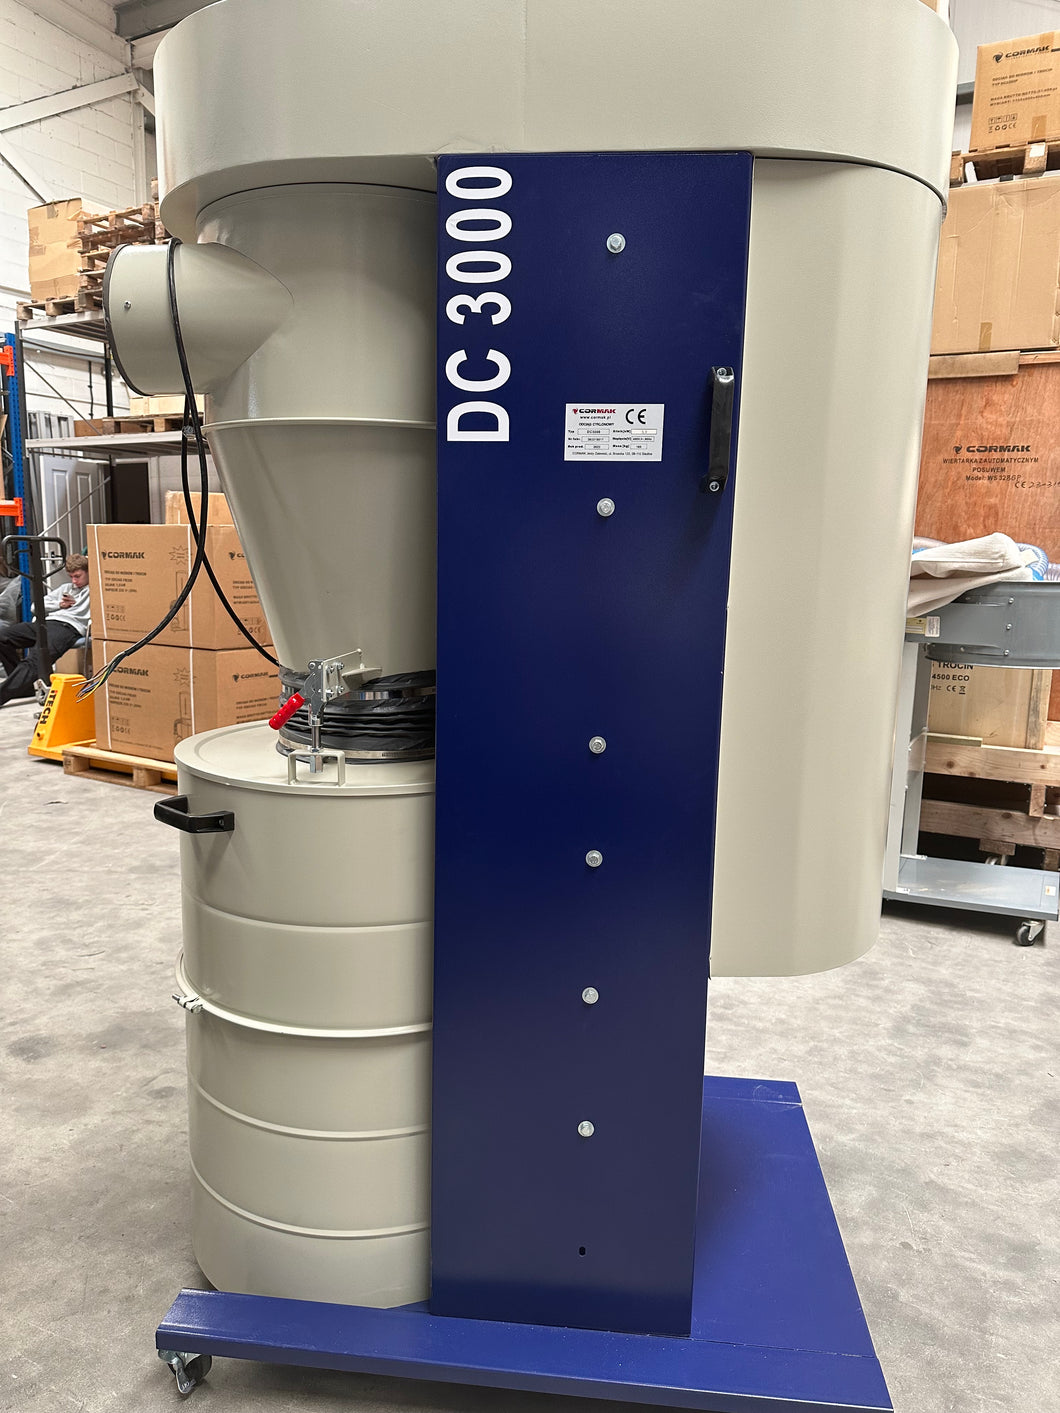 NEW MODEL Cormak DC3000 / 400V 3 Phase Cyclone Dust Extractor